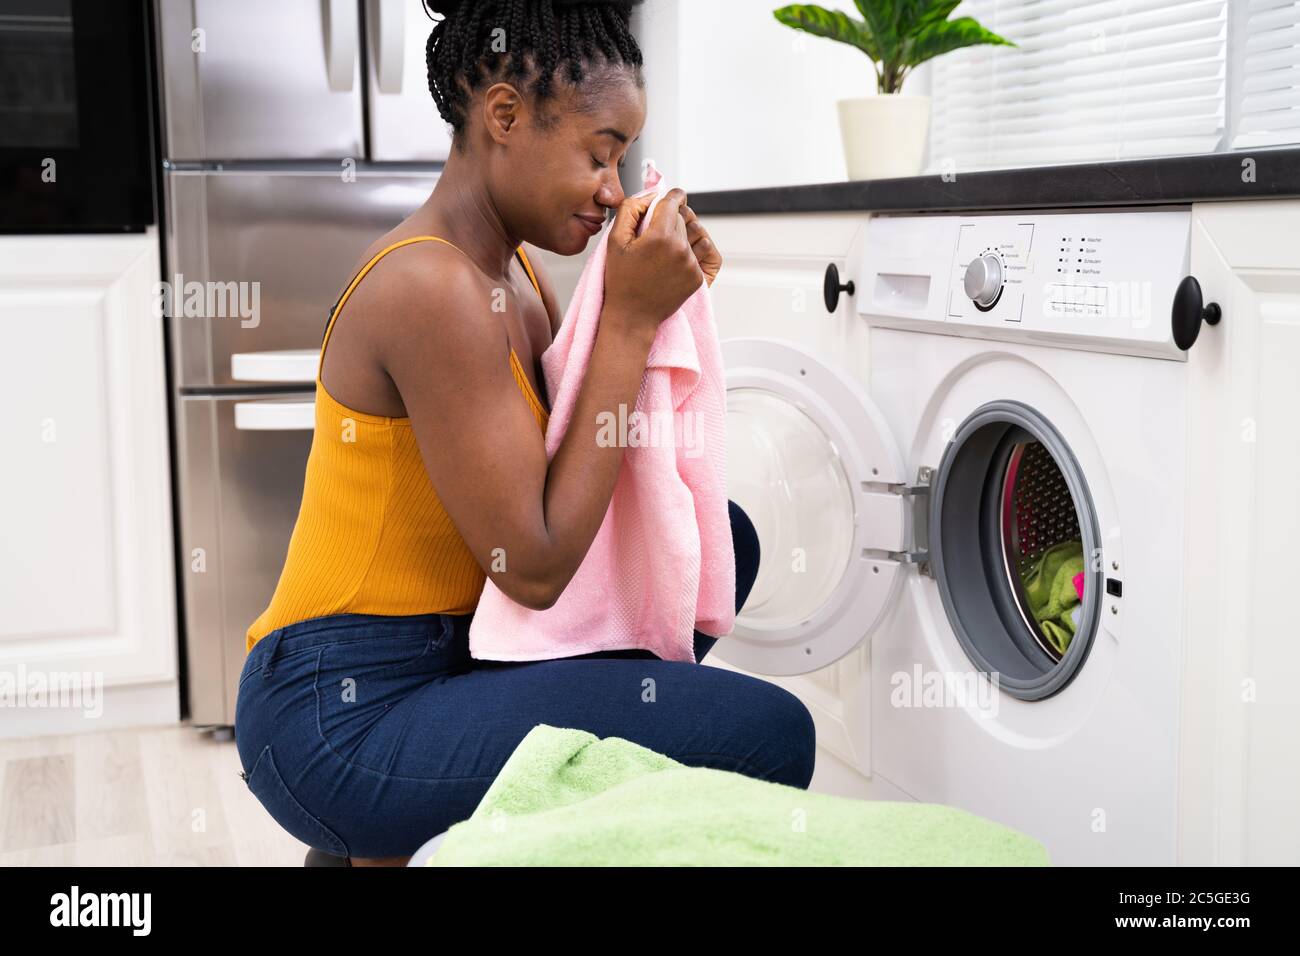 Smelling Washed Clothes Or Laundry At Home Stock Photo